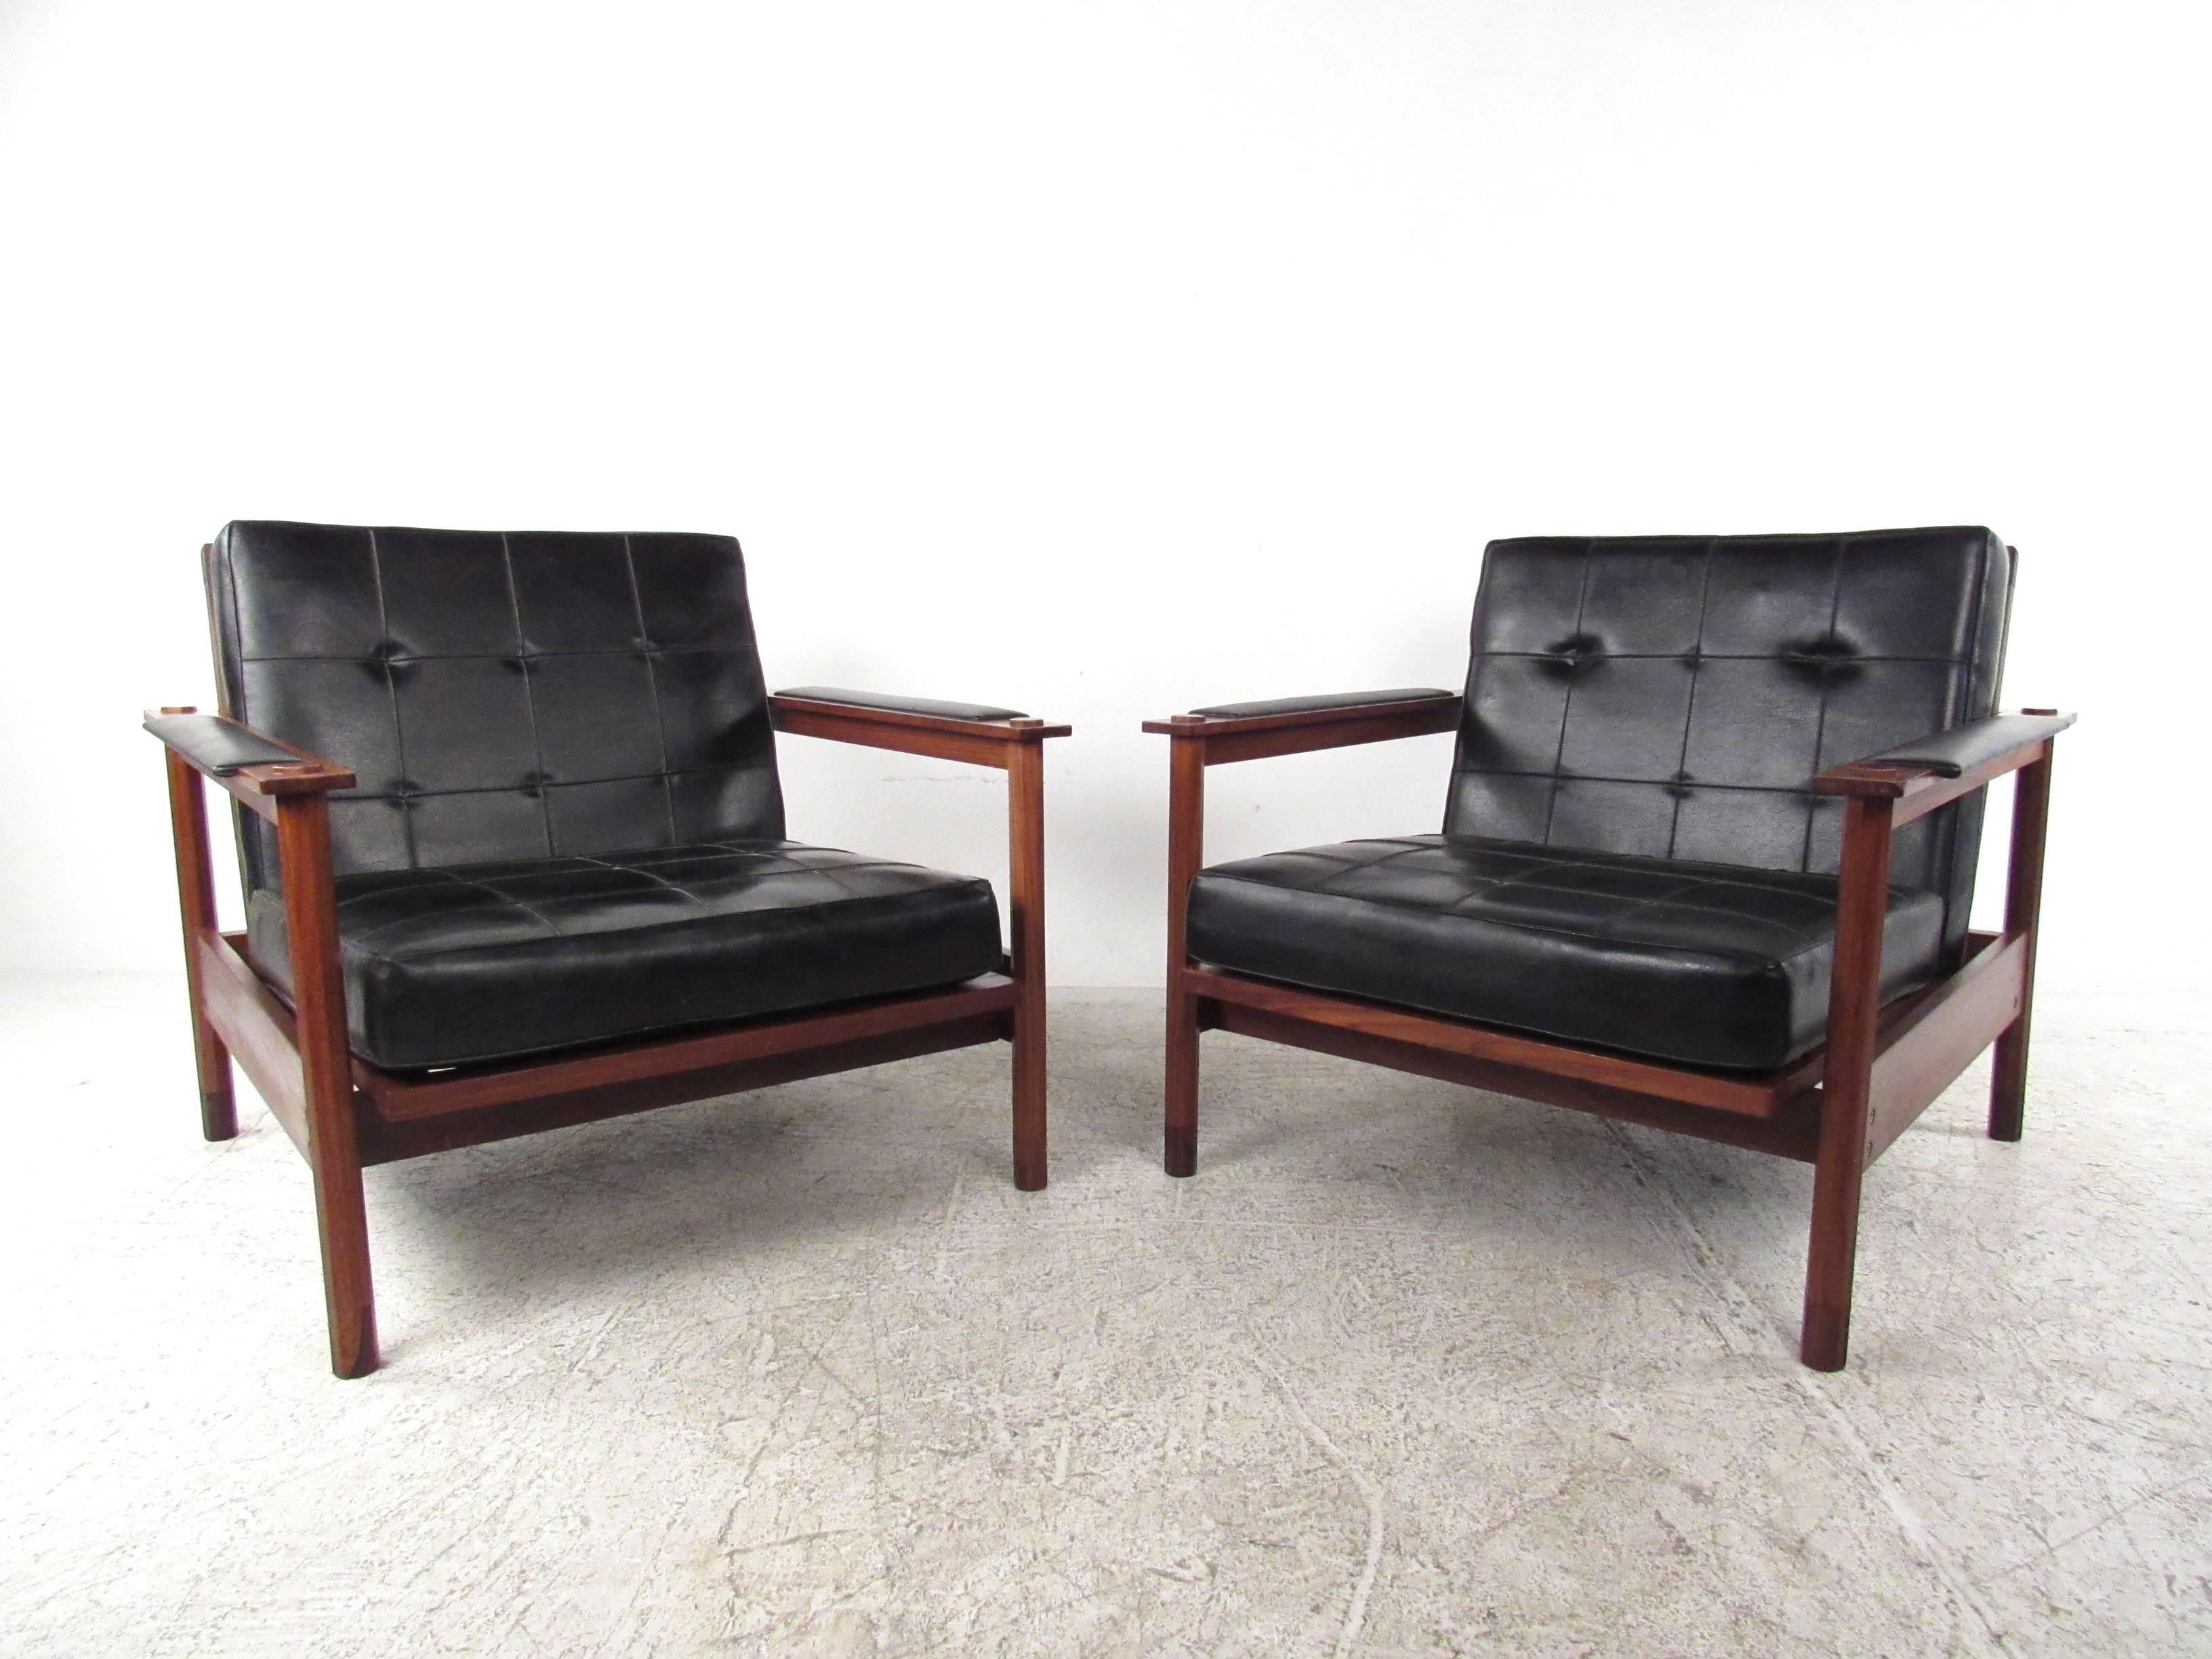 This beautiful pair of walnut and vinyl lounge chairs make a stunning vintage addition to any seating arrangement. Tufted fabric seats also feature multiple seat back angles, vinyl armrests, and octagonal post construction. Comfortable Mid-Century